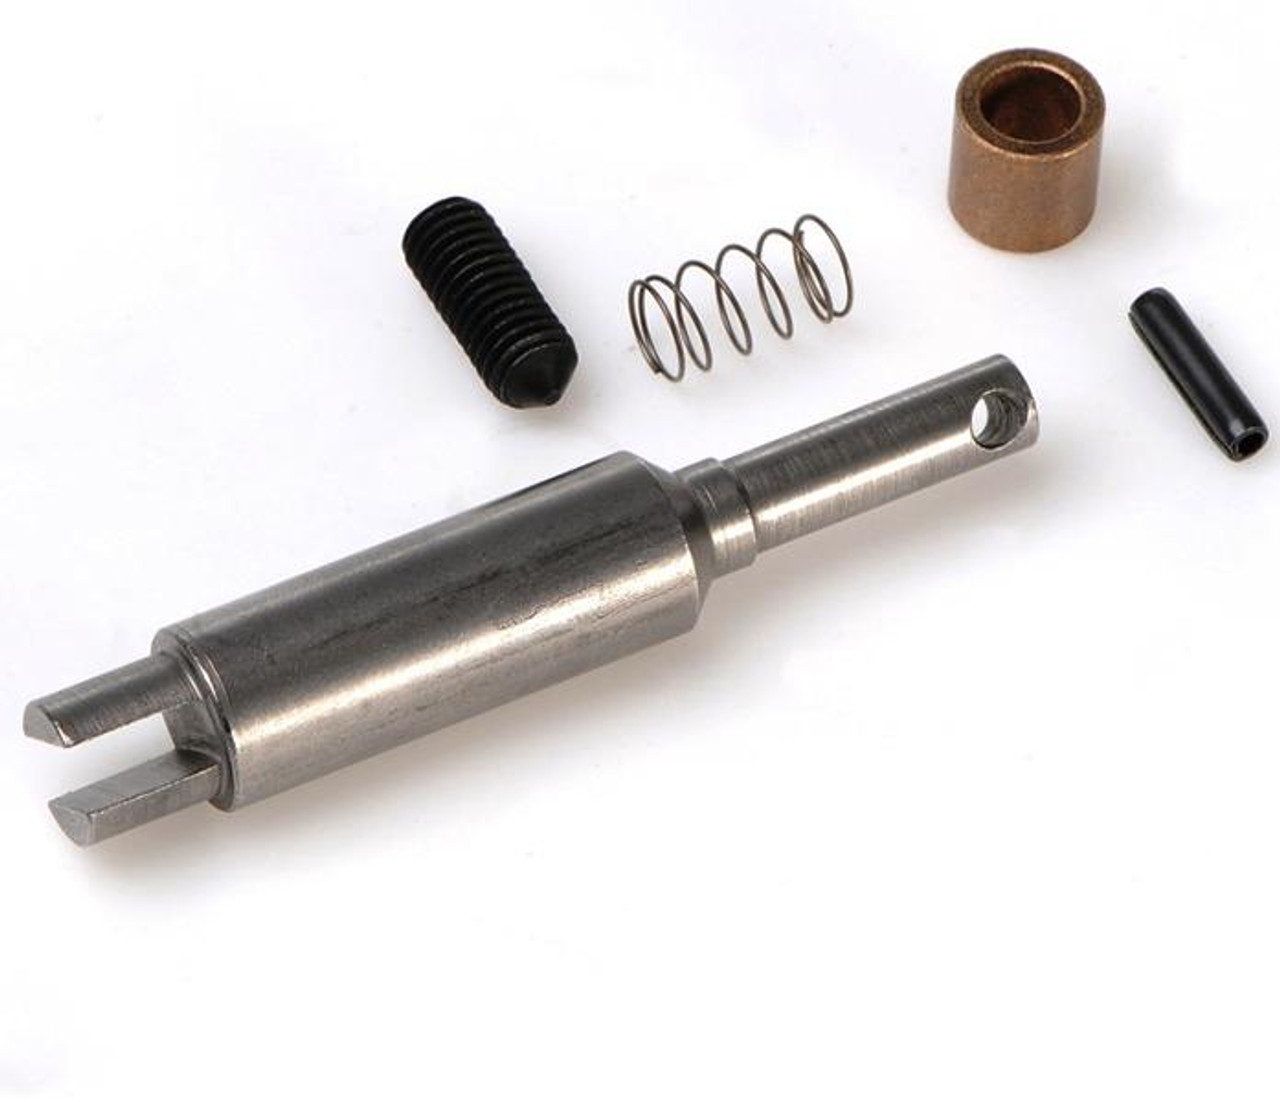  Blum MZK.1201 S-BO AA-CK BL RELEASE ASSEMBLY FOR 7 & 8-SPINDLE BORING HEADS item number 01310751 